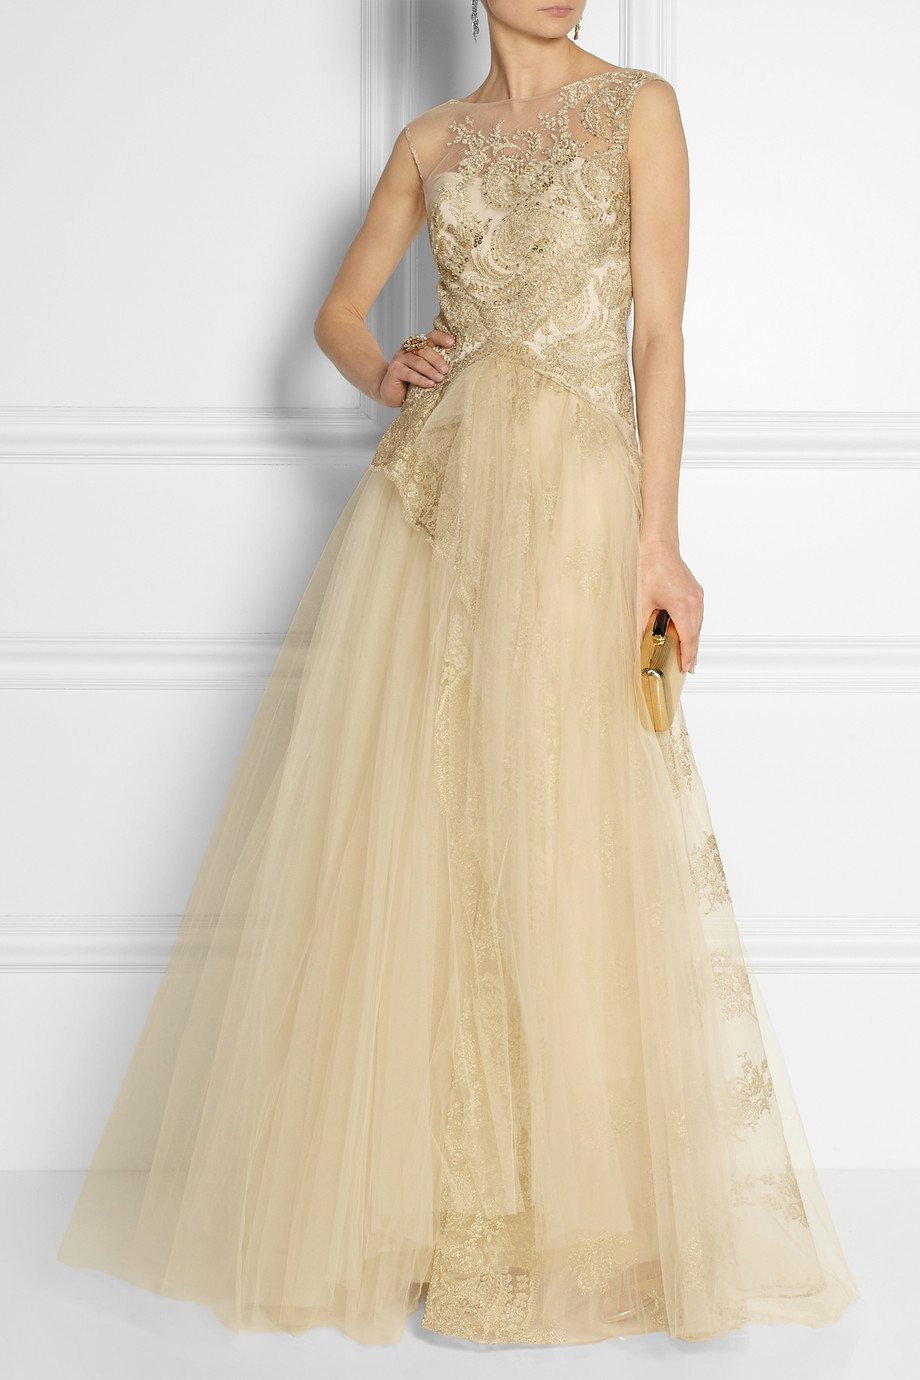 Lyst Notte By Marchesa Embellished Tulle Gown In Metallic 6795